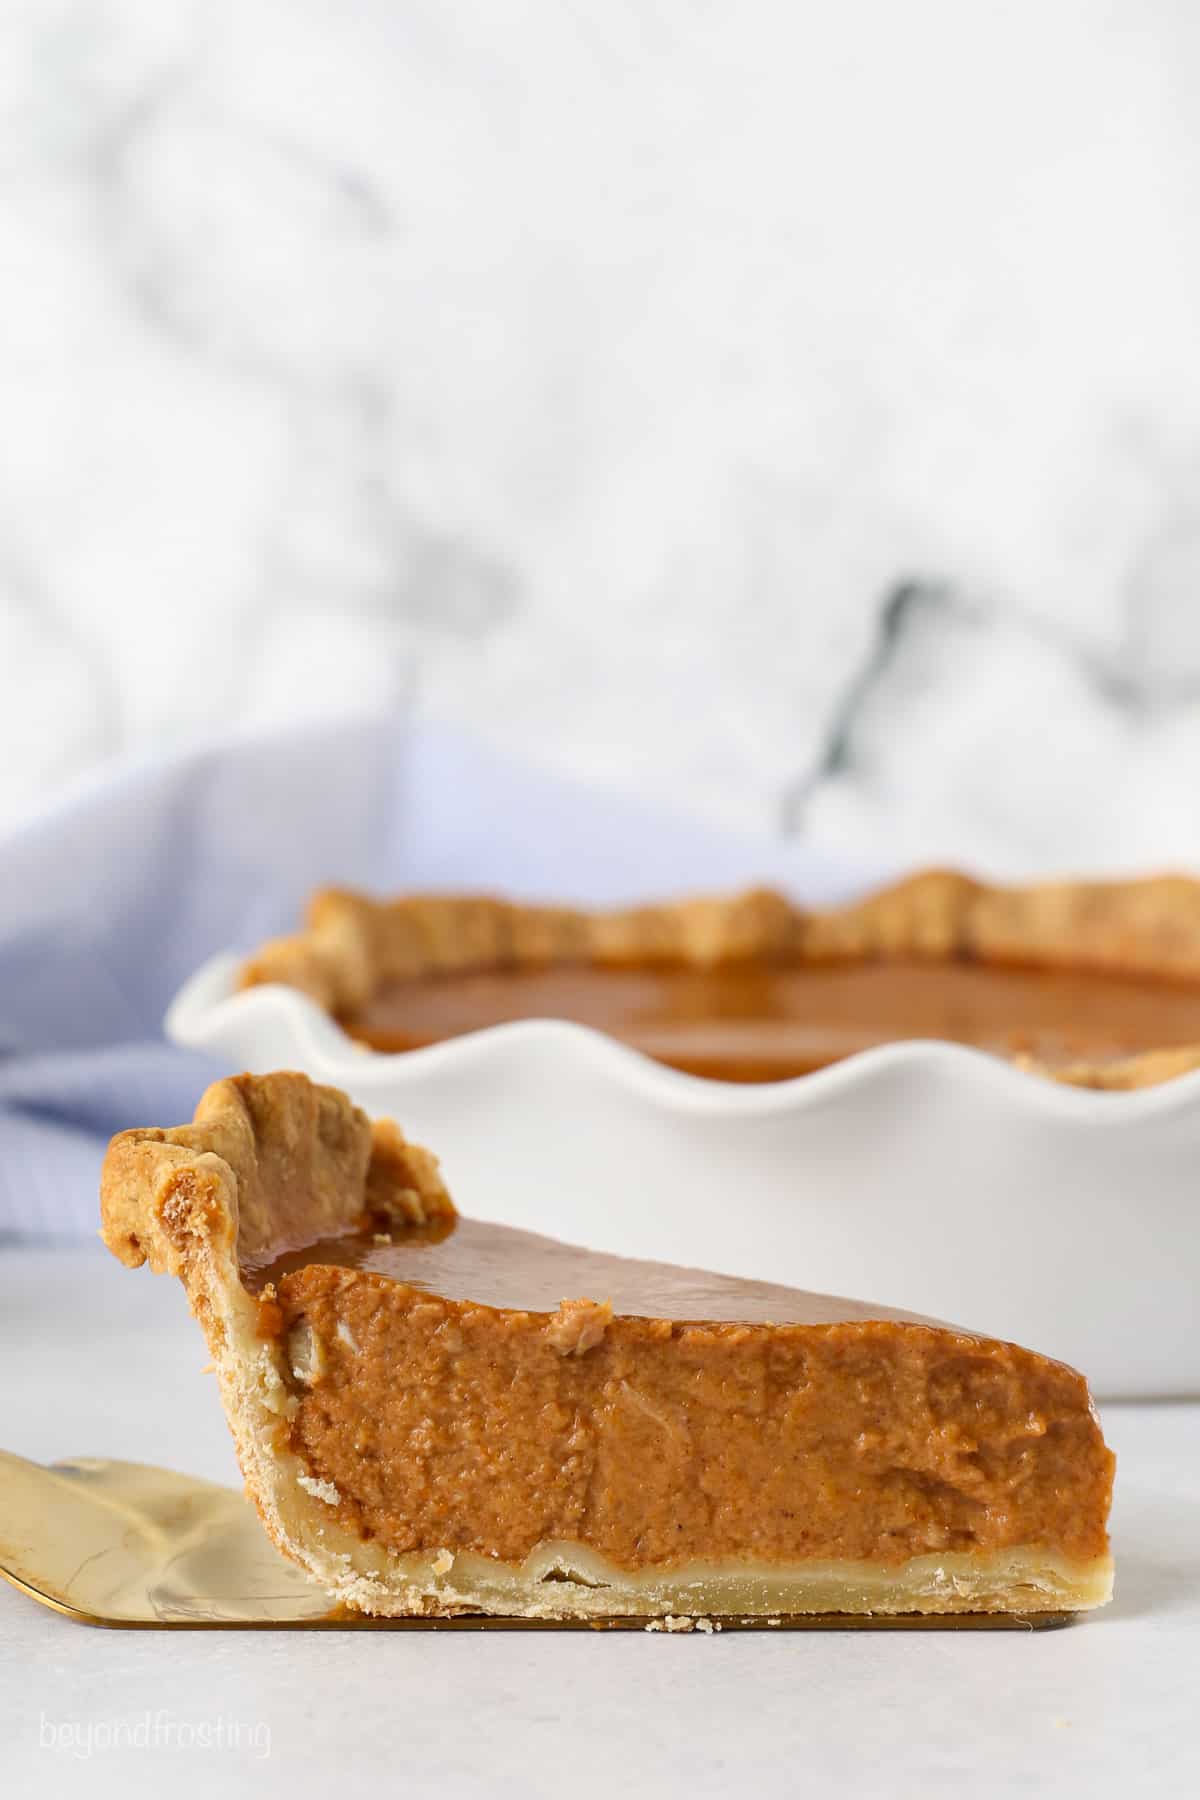 Side view of a slice of pumpkin pie in a blind baked pie crust, with the rest of the pie in the background.